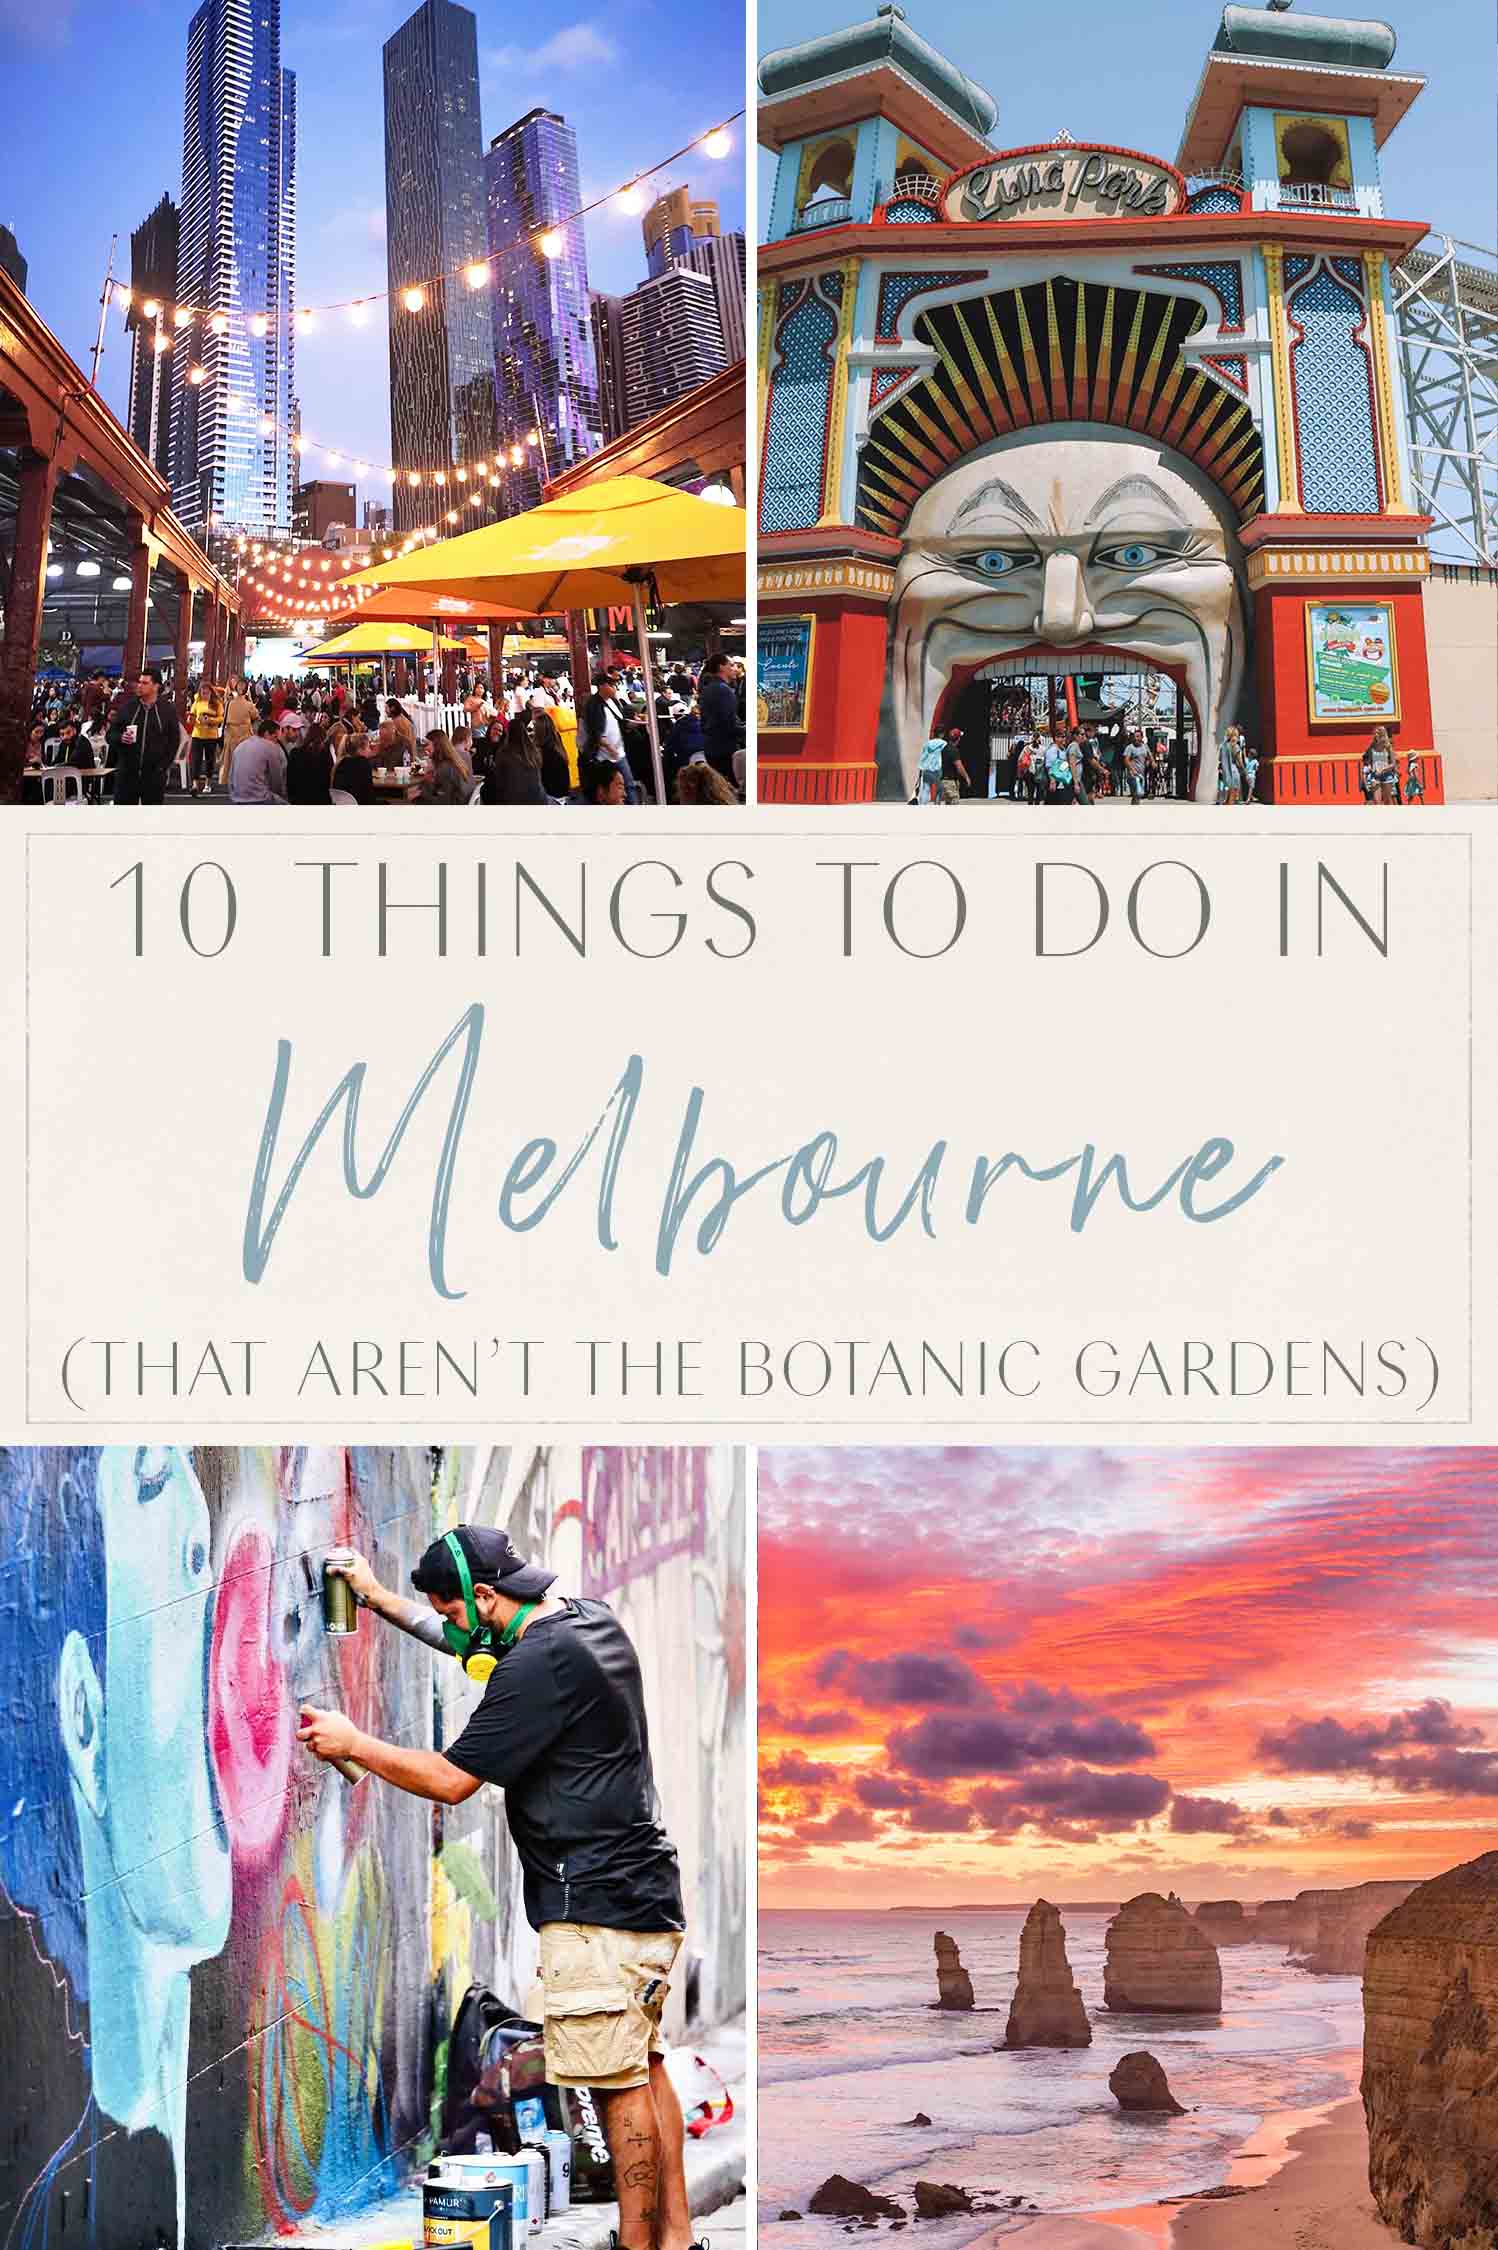 10 Things To Do in Melbourne (That Aren’t the Botanic Gardens) • The Blonde Abroad